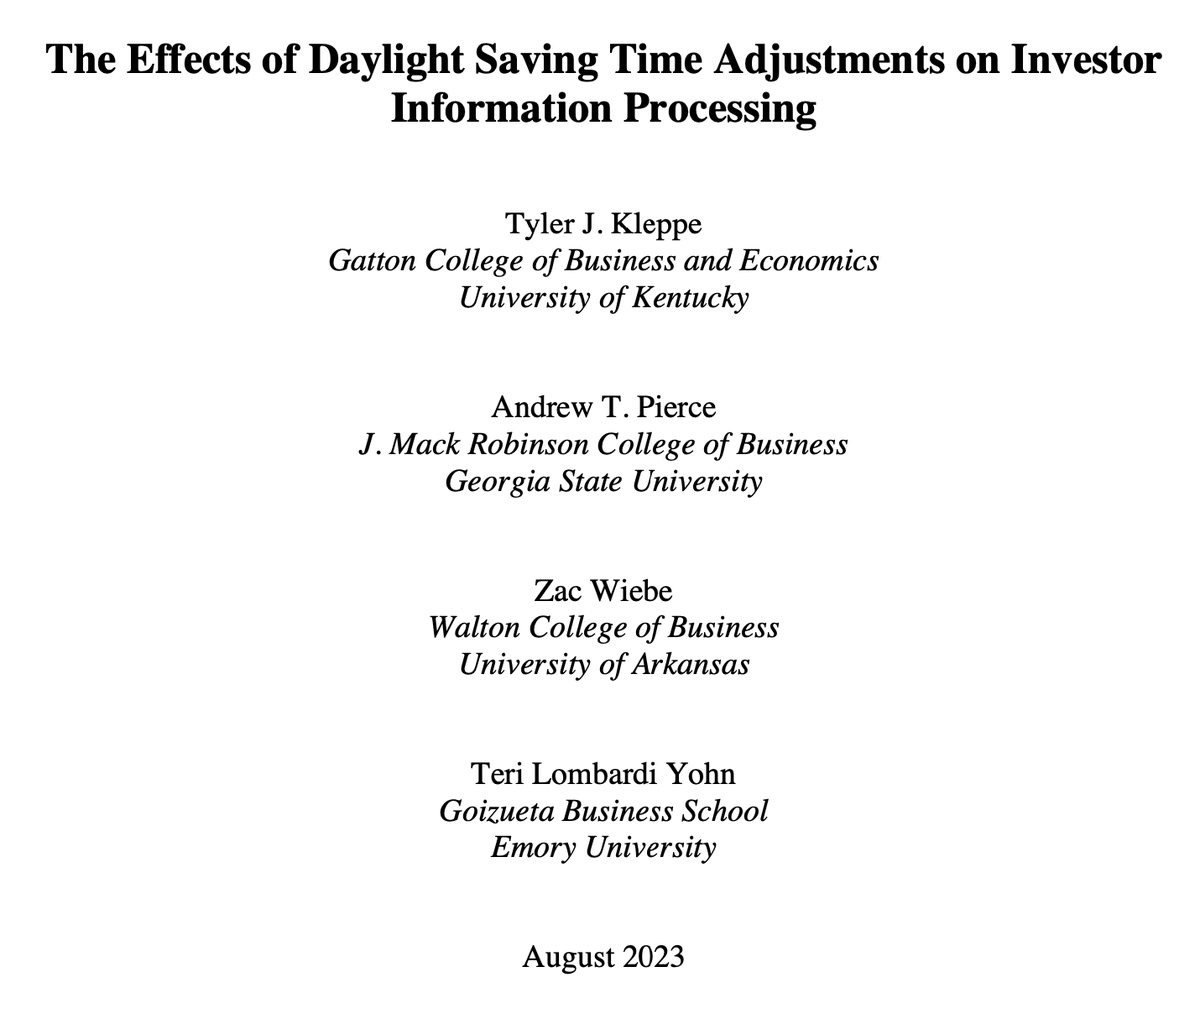 “Permanent Daylight Saving Time could have adverse impacts on individuals’ moods in winter, which could impair investors’ information processing.” #DitchDST #Finance papers.ssrn.com/sol3/papers.cf…